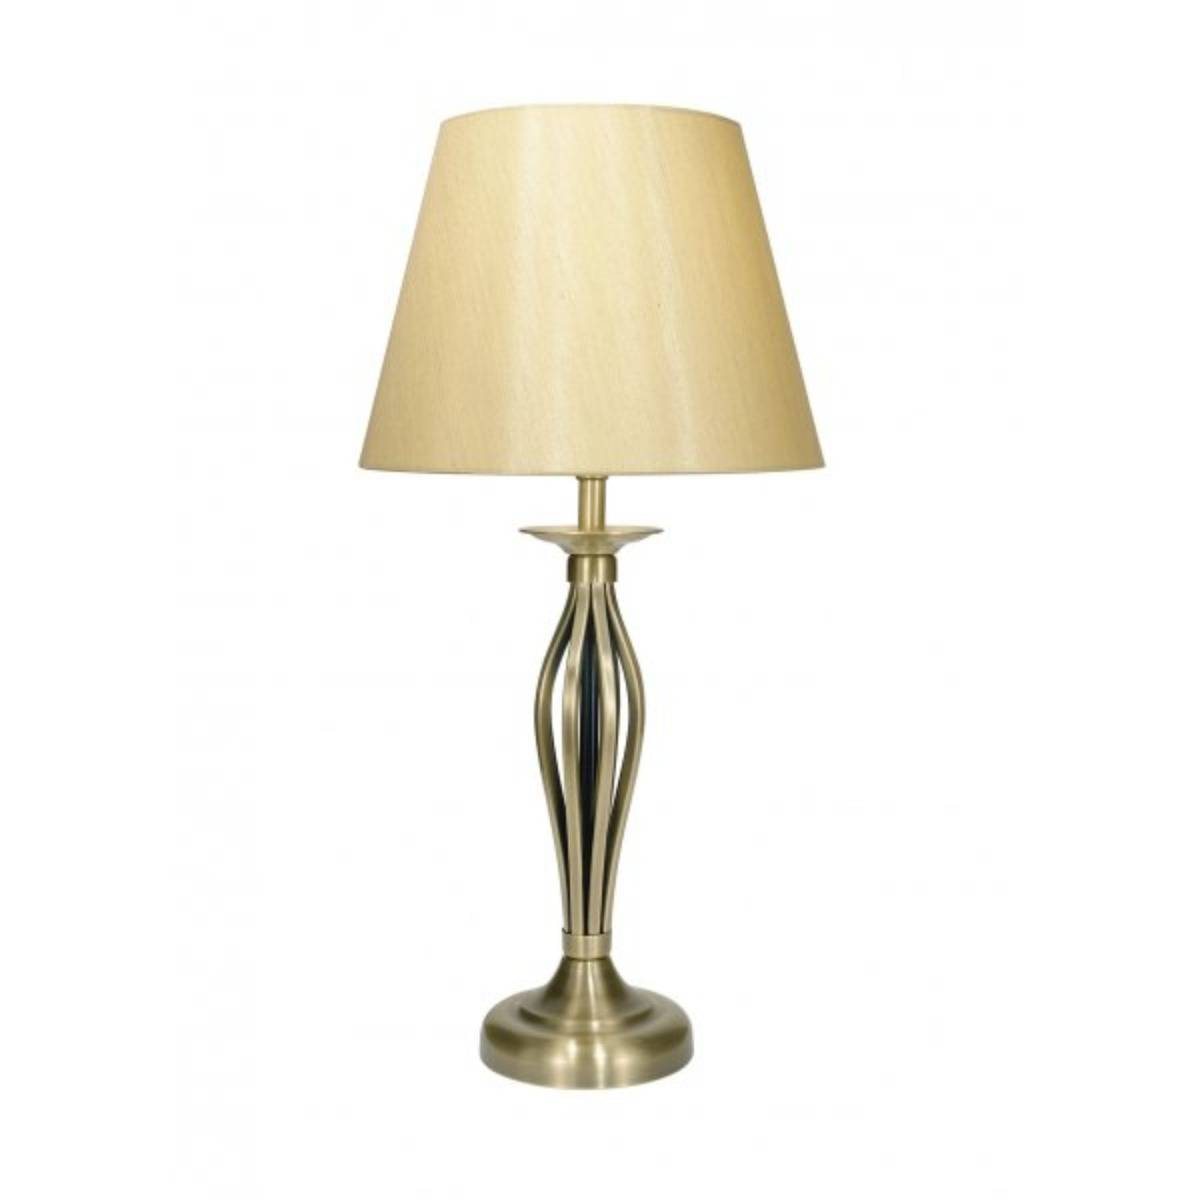 Go for antique brass table lamp